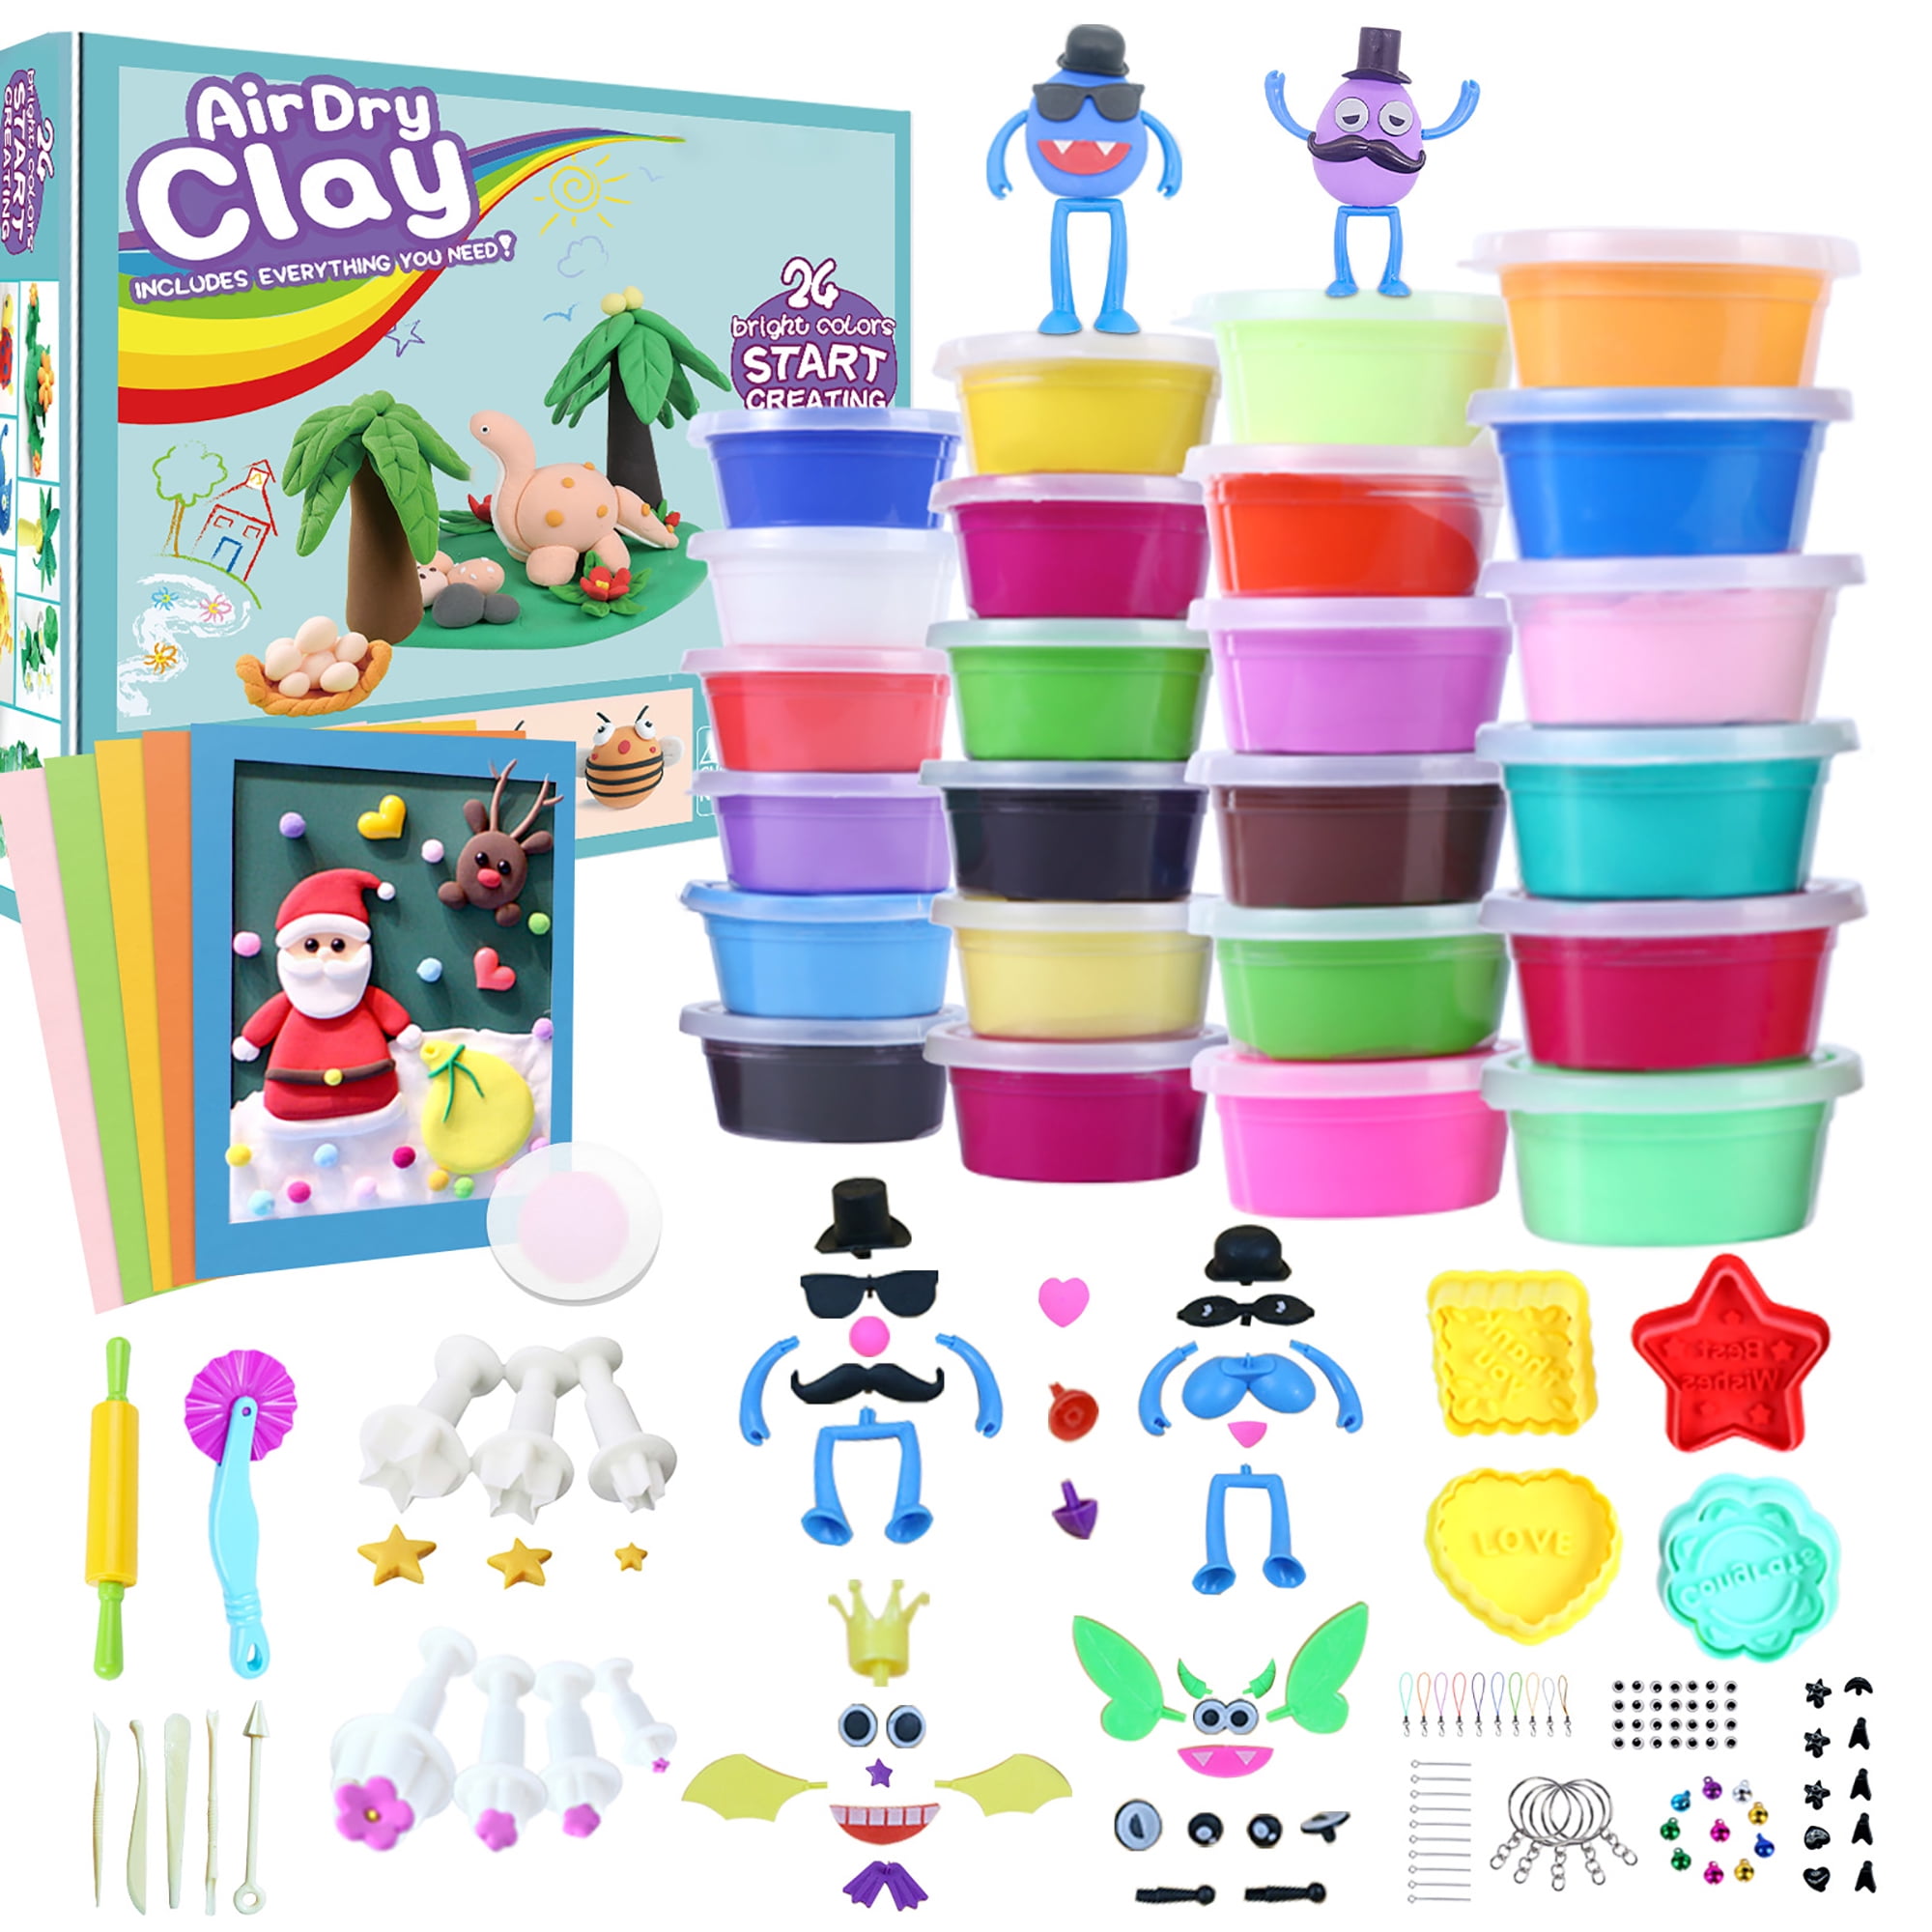 Titoclar Arts & Crafts for Kids Ages 8-12 6-8 4-8, Air Dry Clay